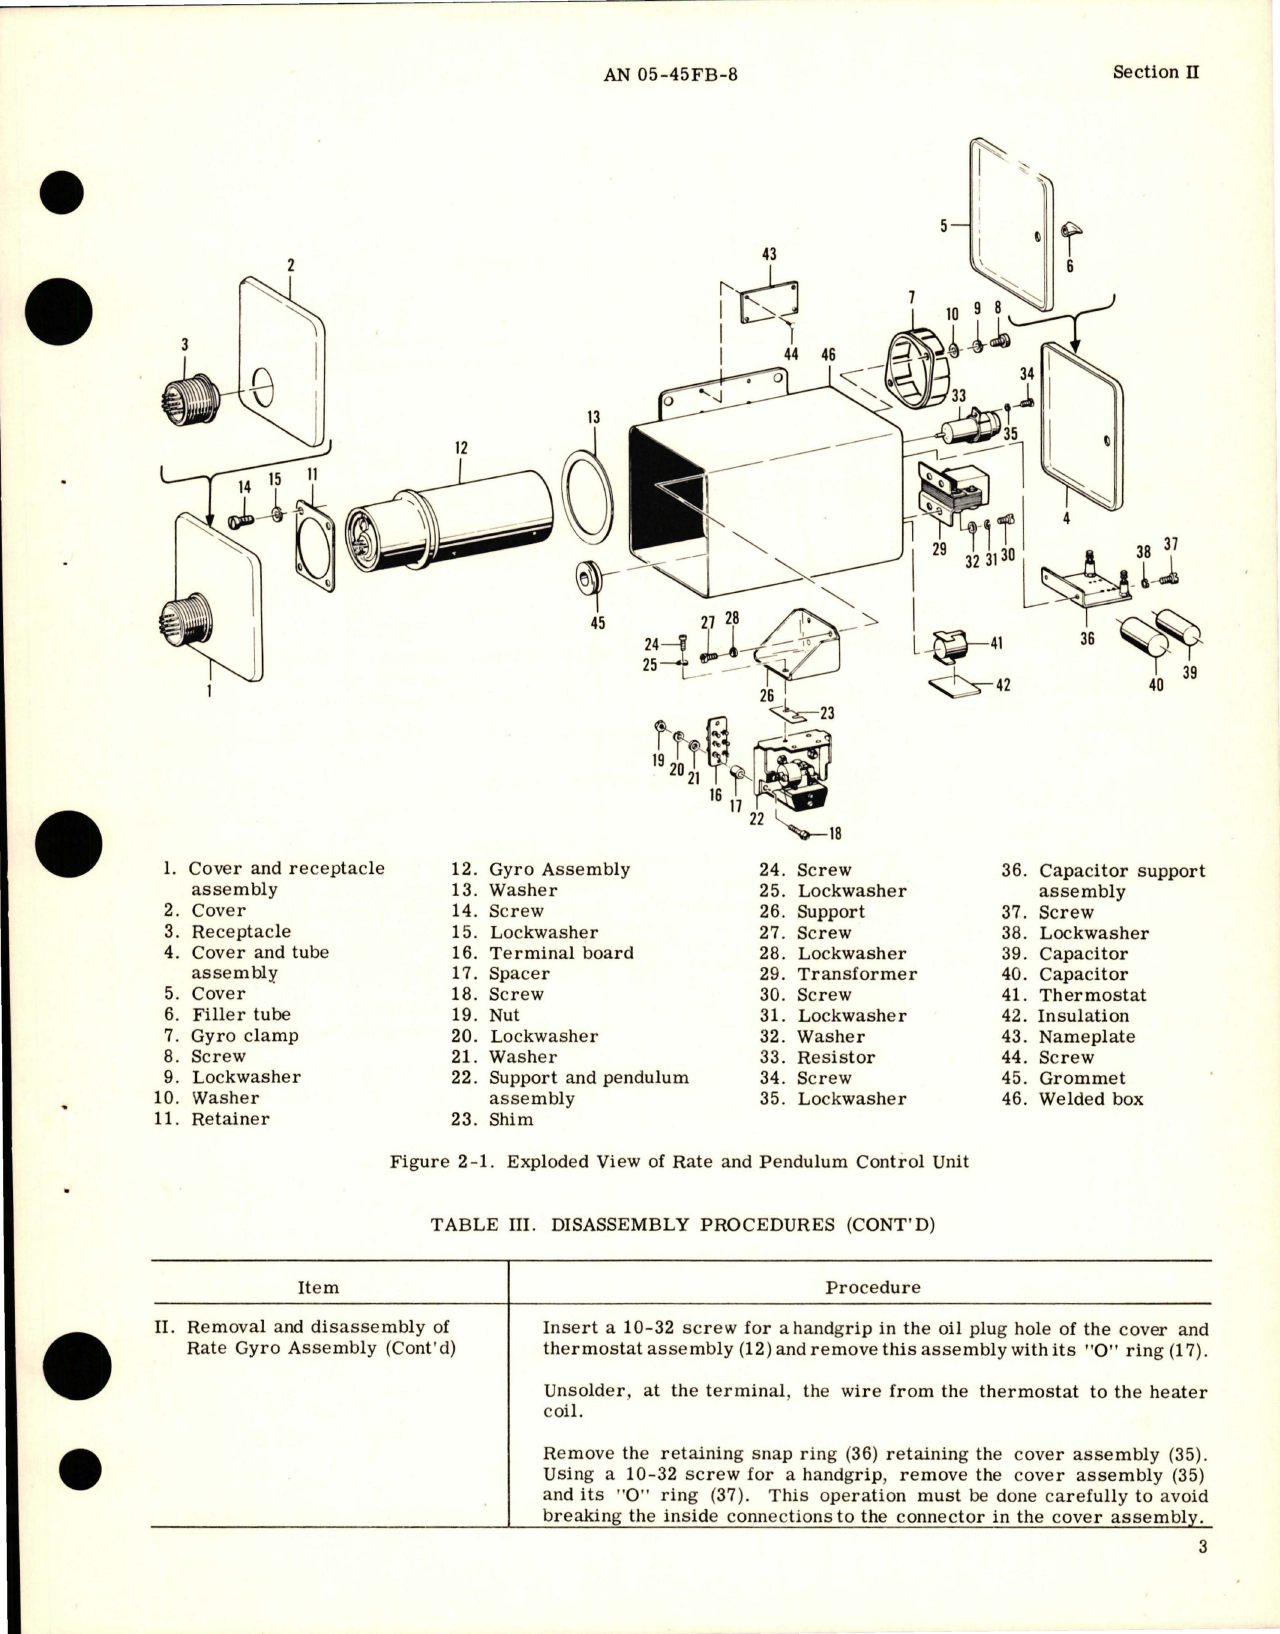 Sample page 7 from AirCorps Library document: Overhaul Instructions for Rate and Pendulum Control Unit for G3 Automatic Pilot - Models 2CJ4B1 and 2CJ4B3 